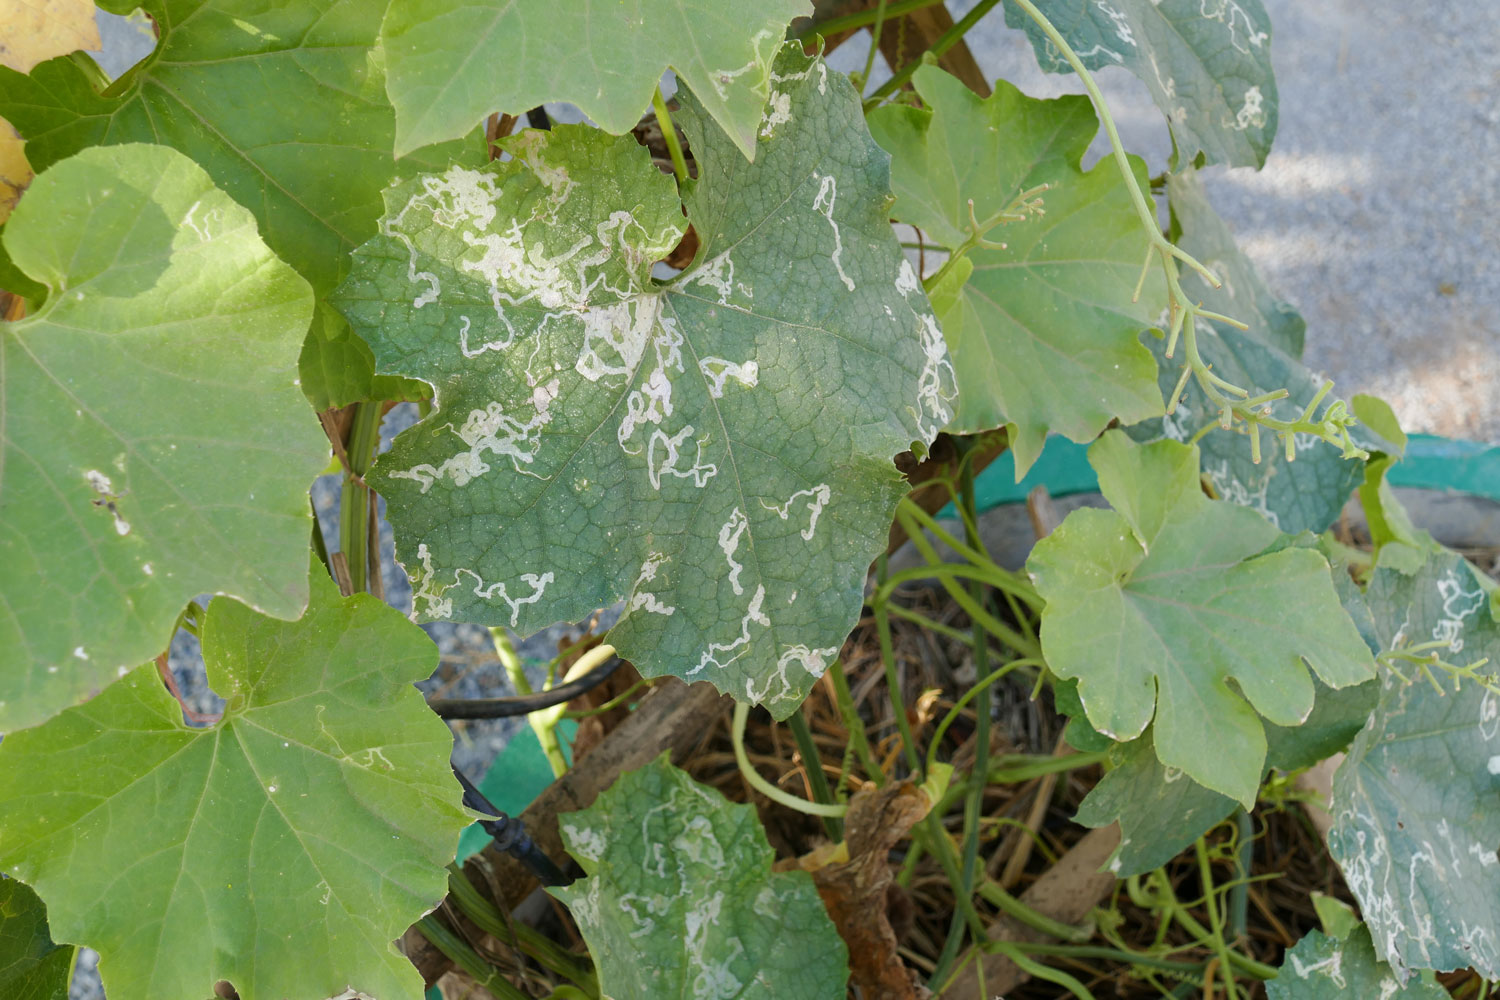 Damage squash leaves caused by leafminers